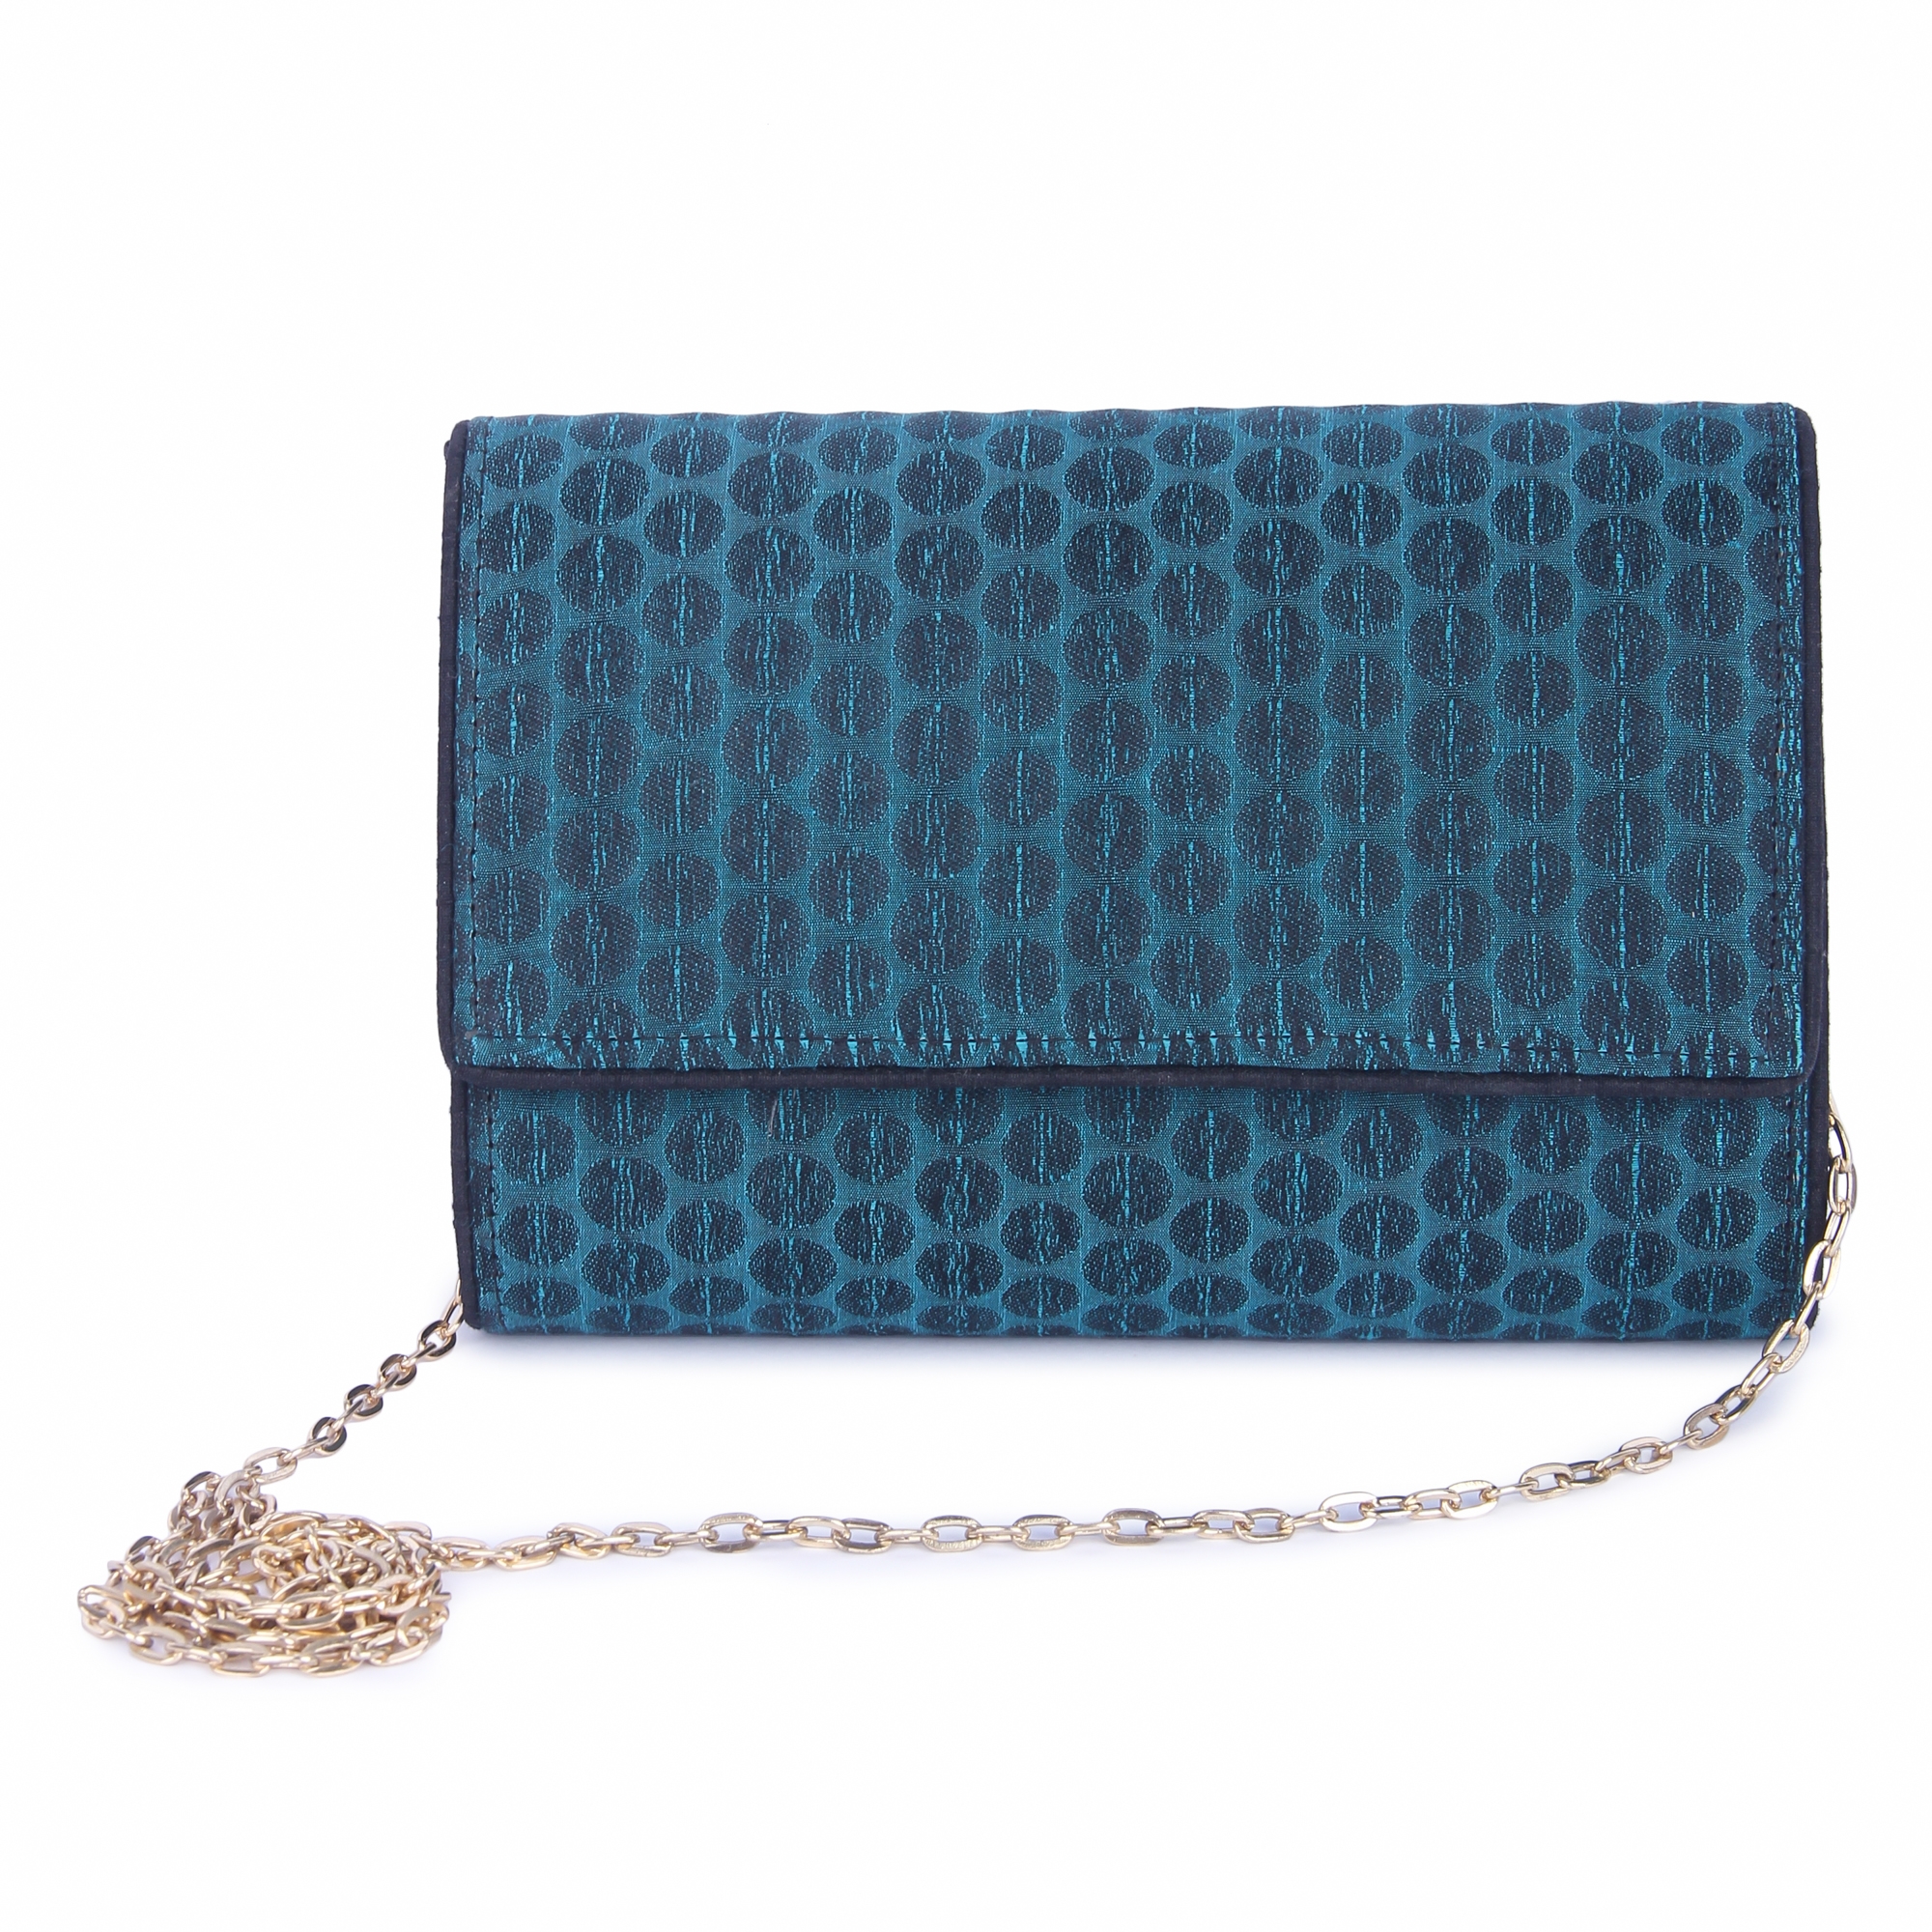 Dotted Teal clutch